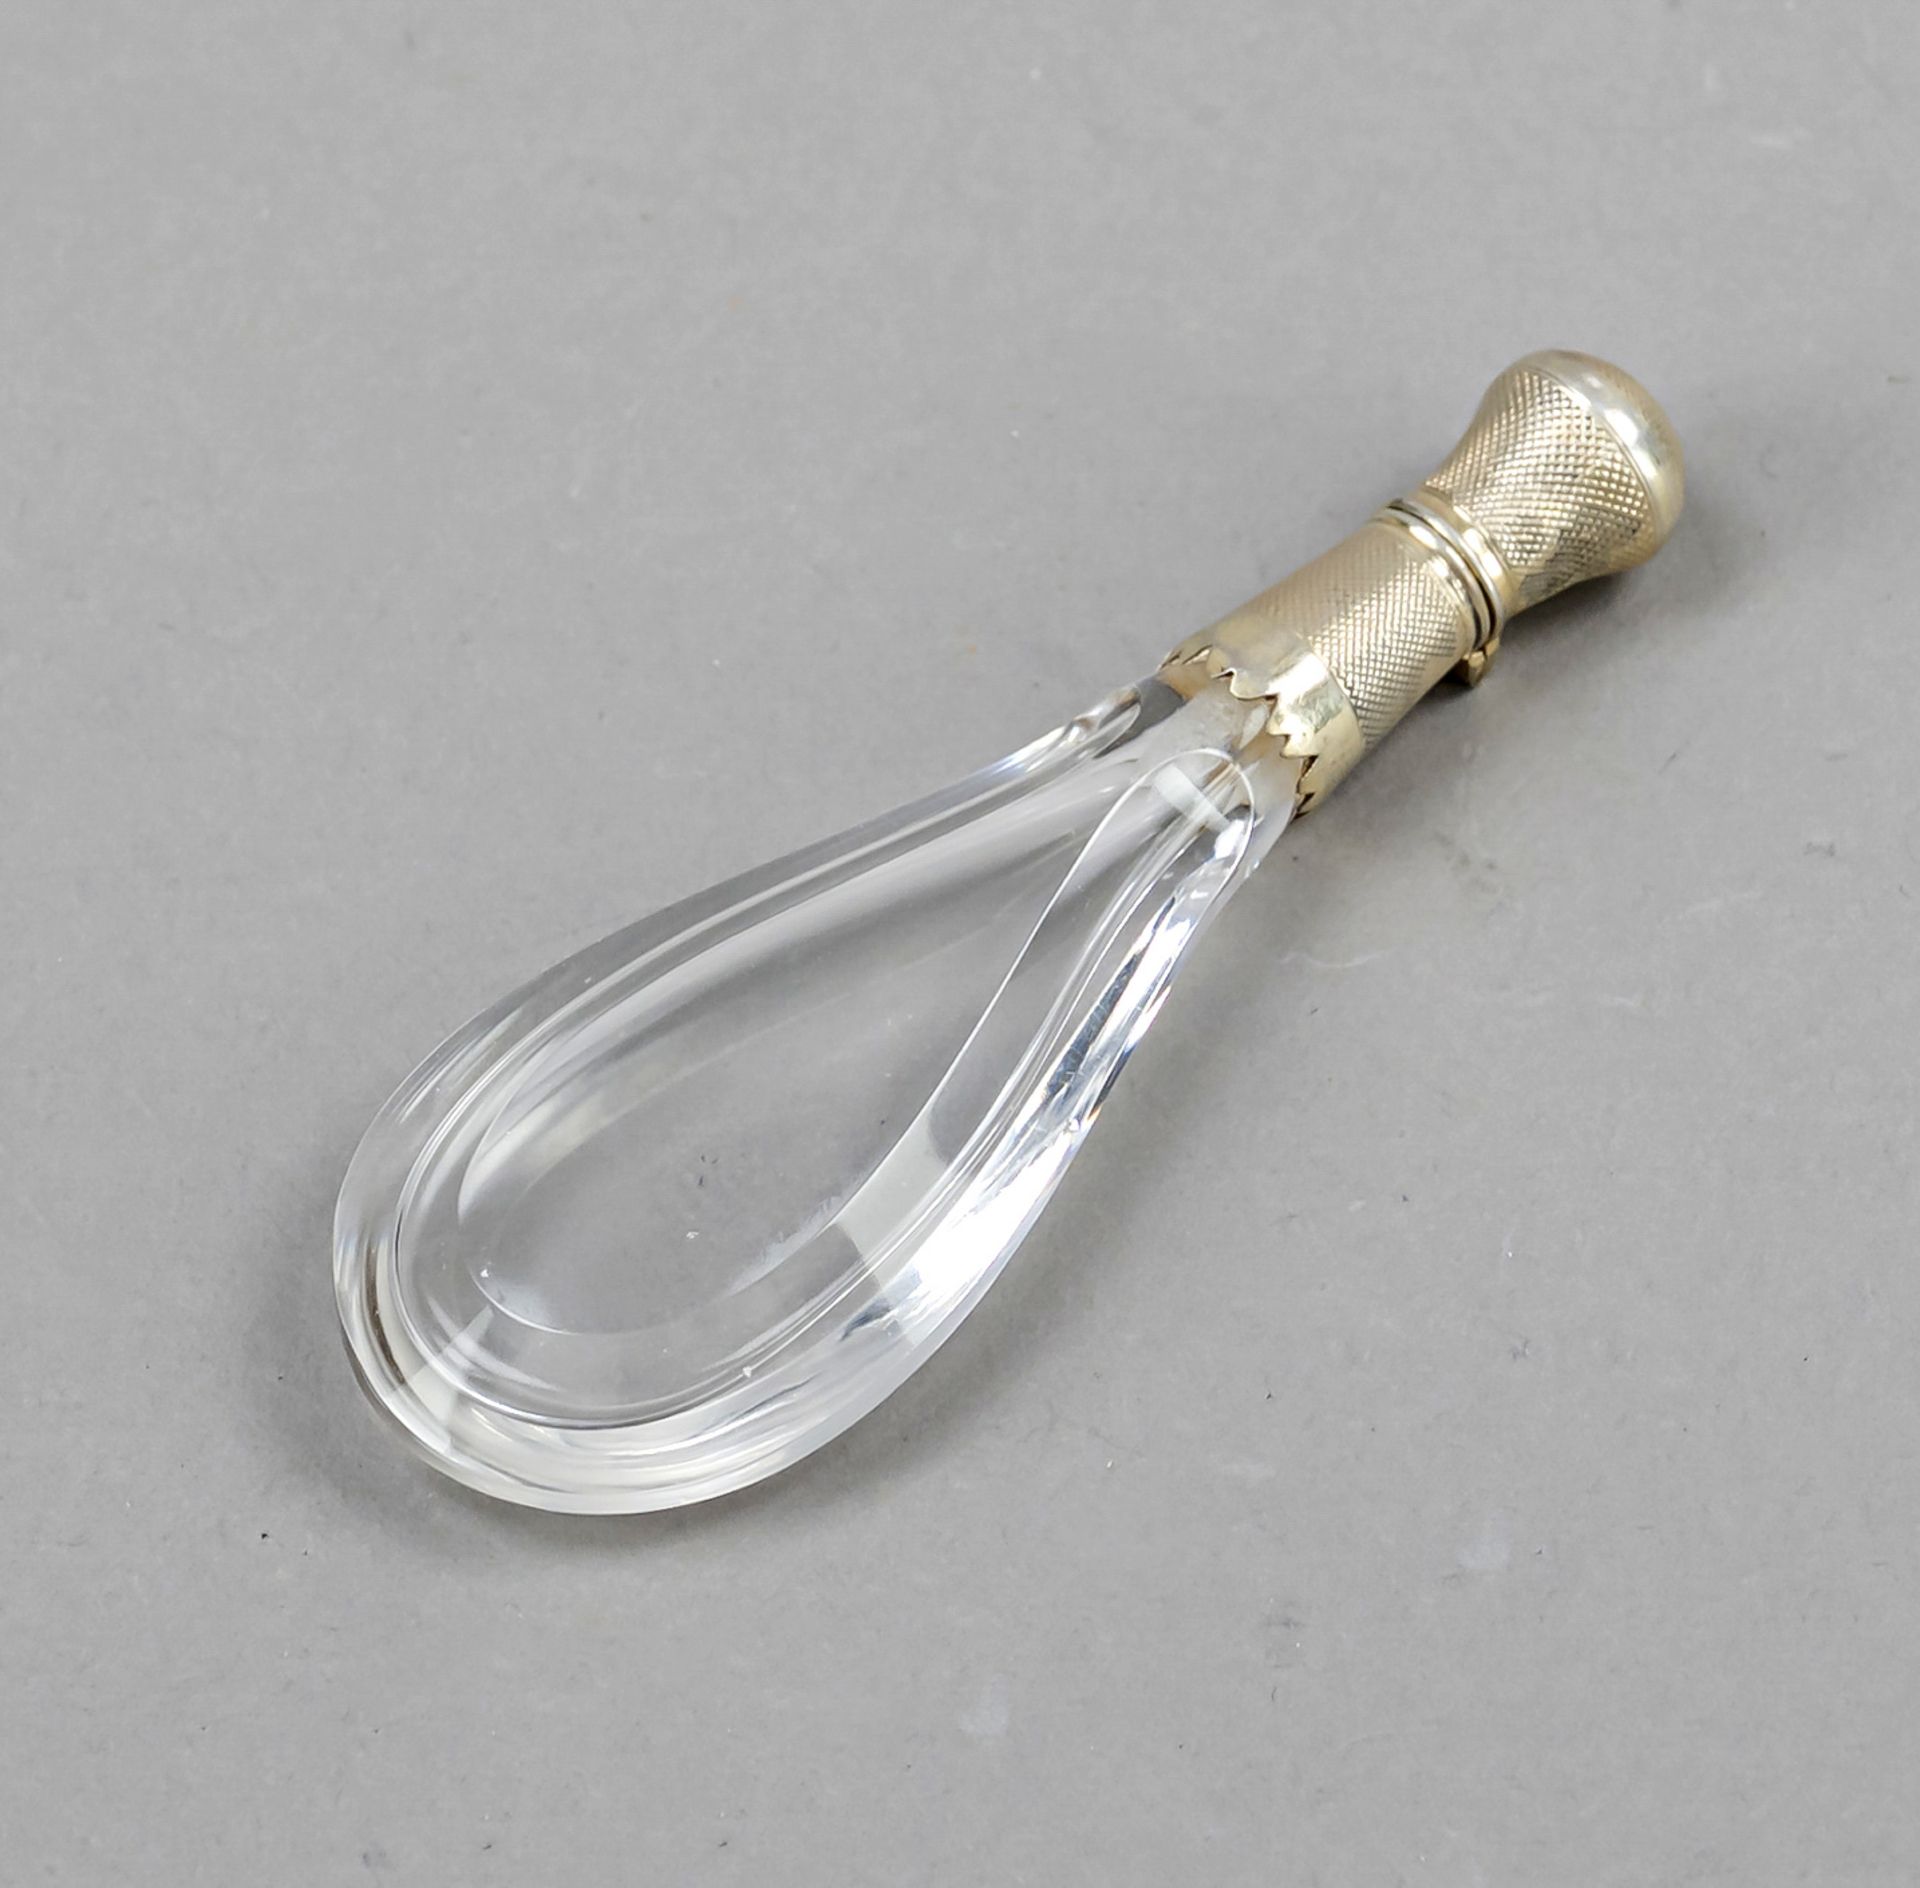 Perfume bottle with silver lid mounting, 1st half 20th century, hallmarked silver, with engraved